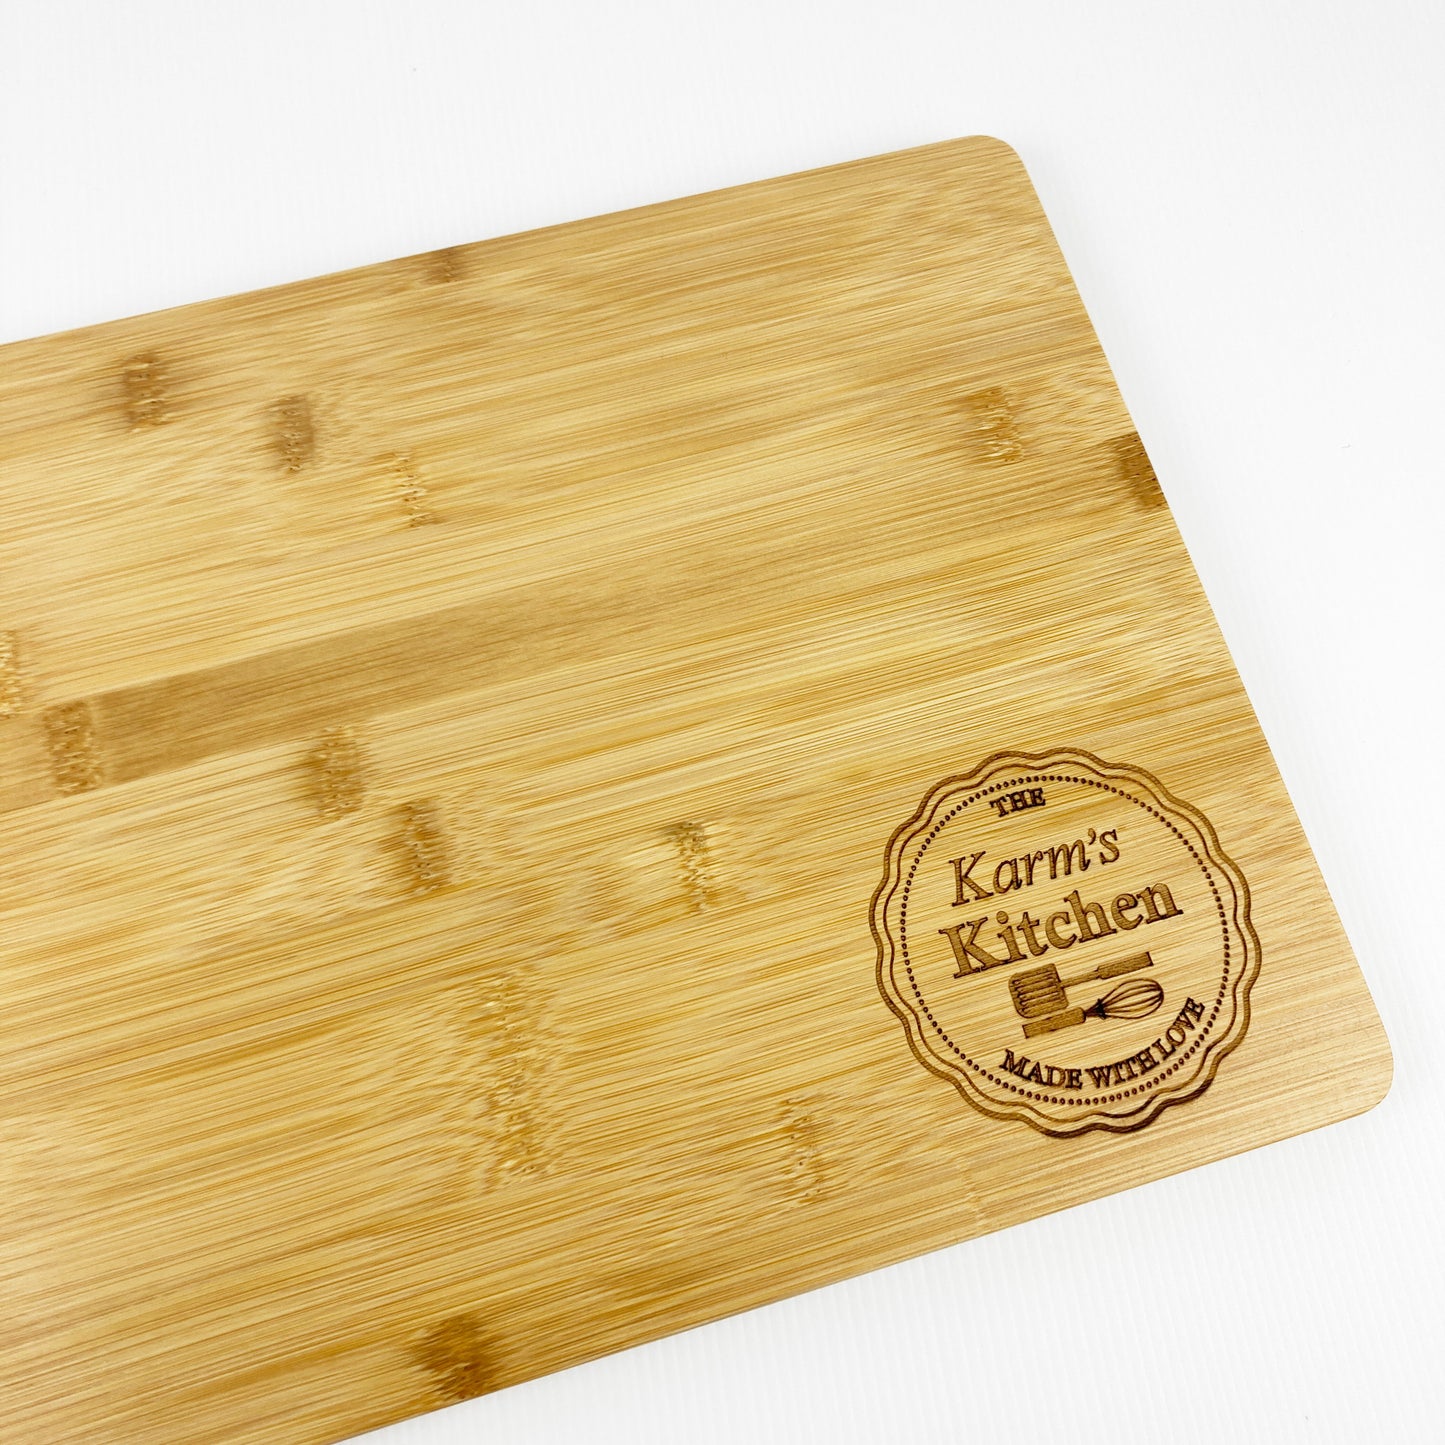 Family Kitchen Monogram Wooden Chopping Board Gift Made with Love Mothers Day Birthday